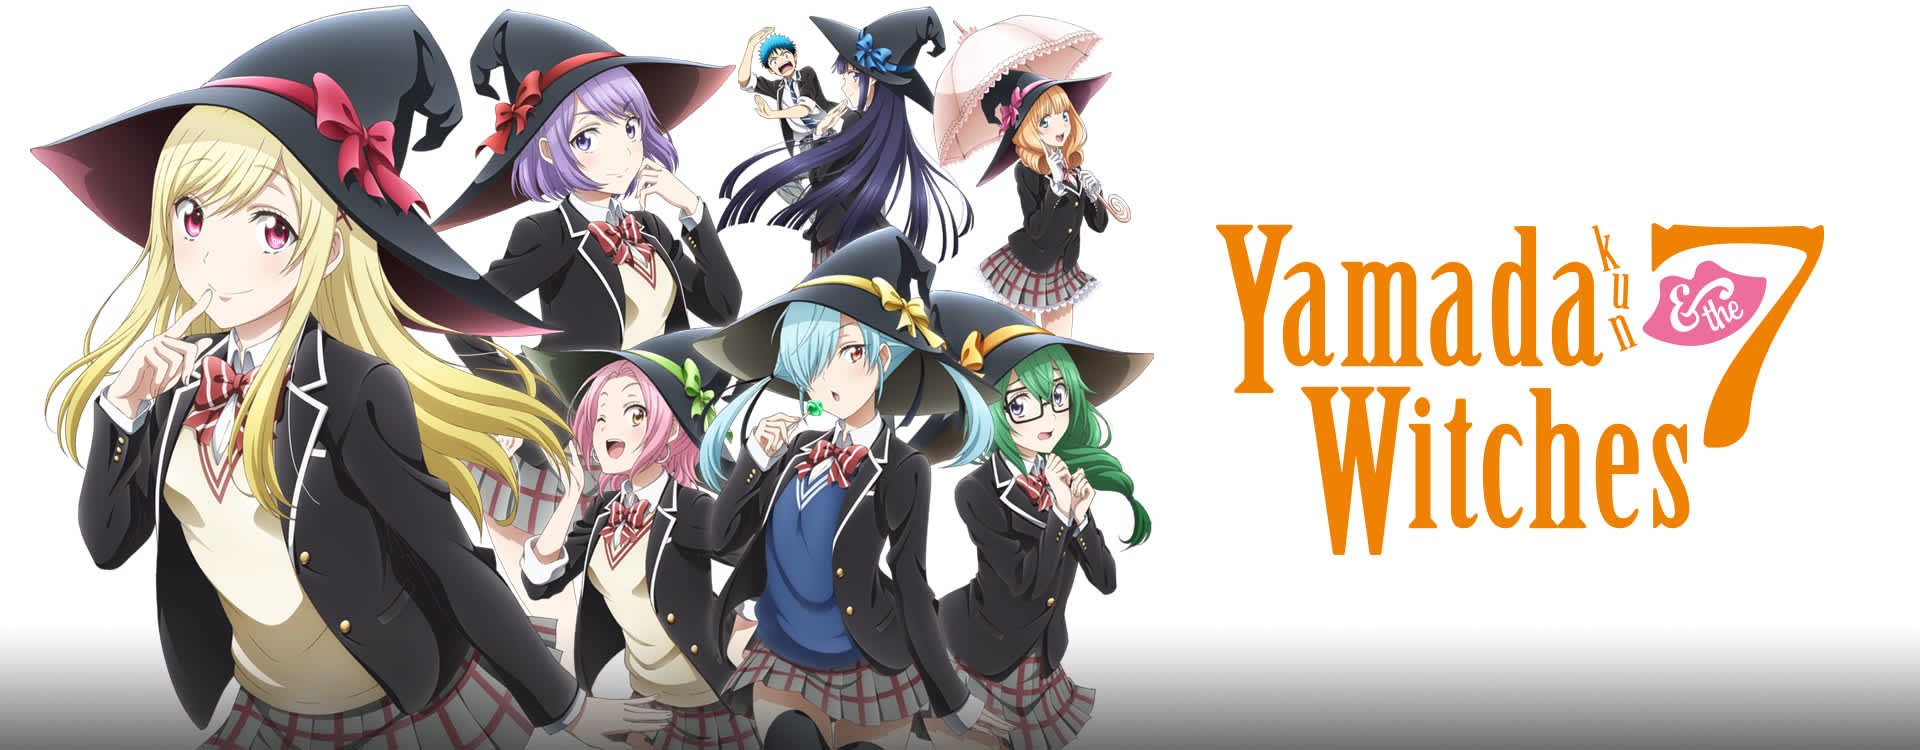 Yamada Kun And The Seven Witches